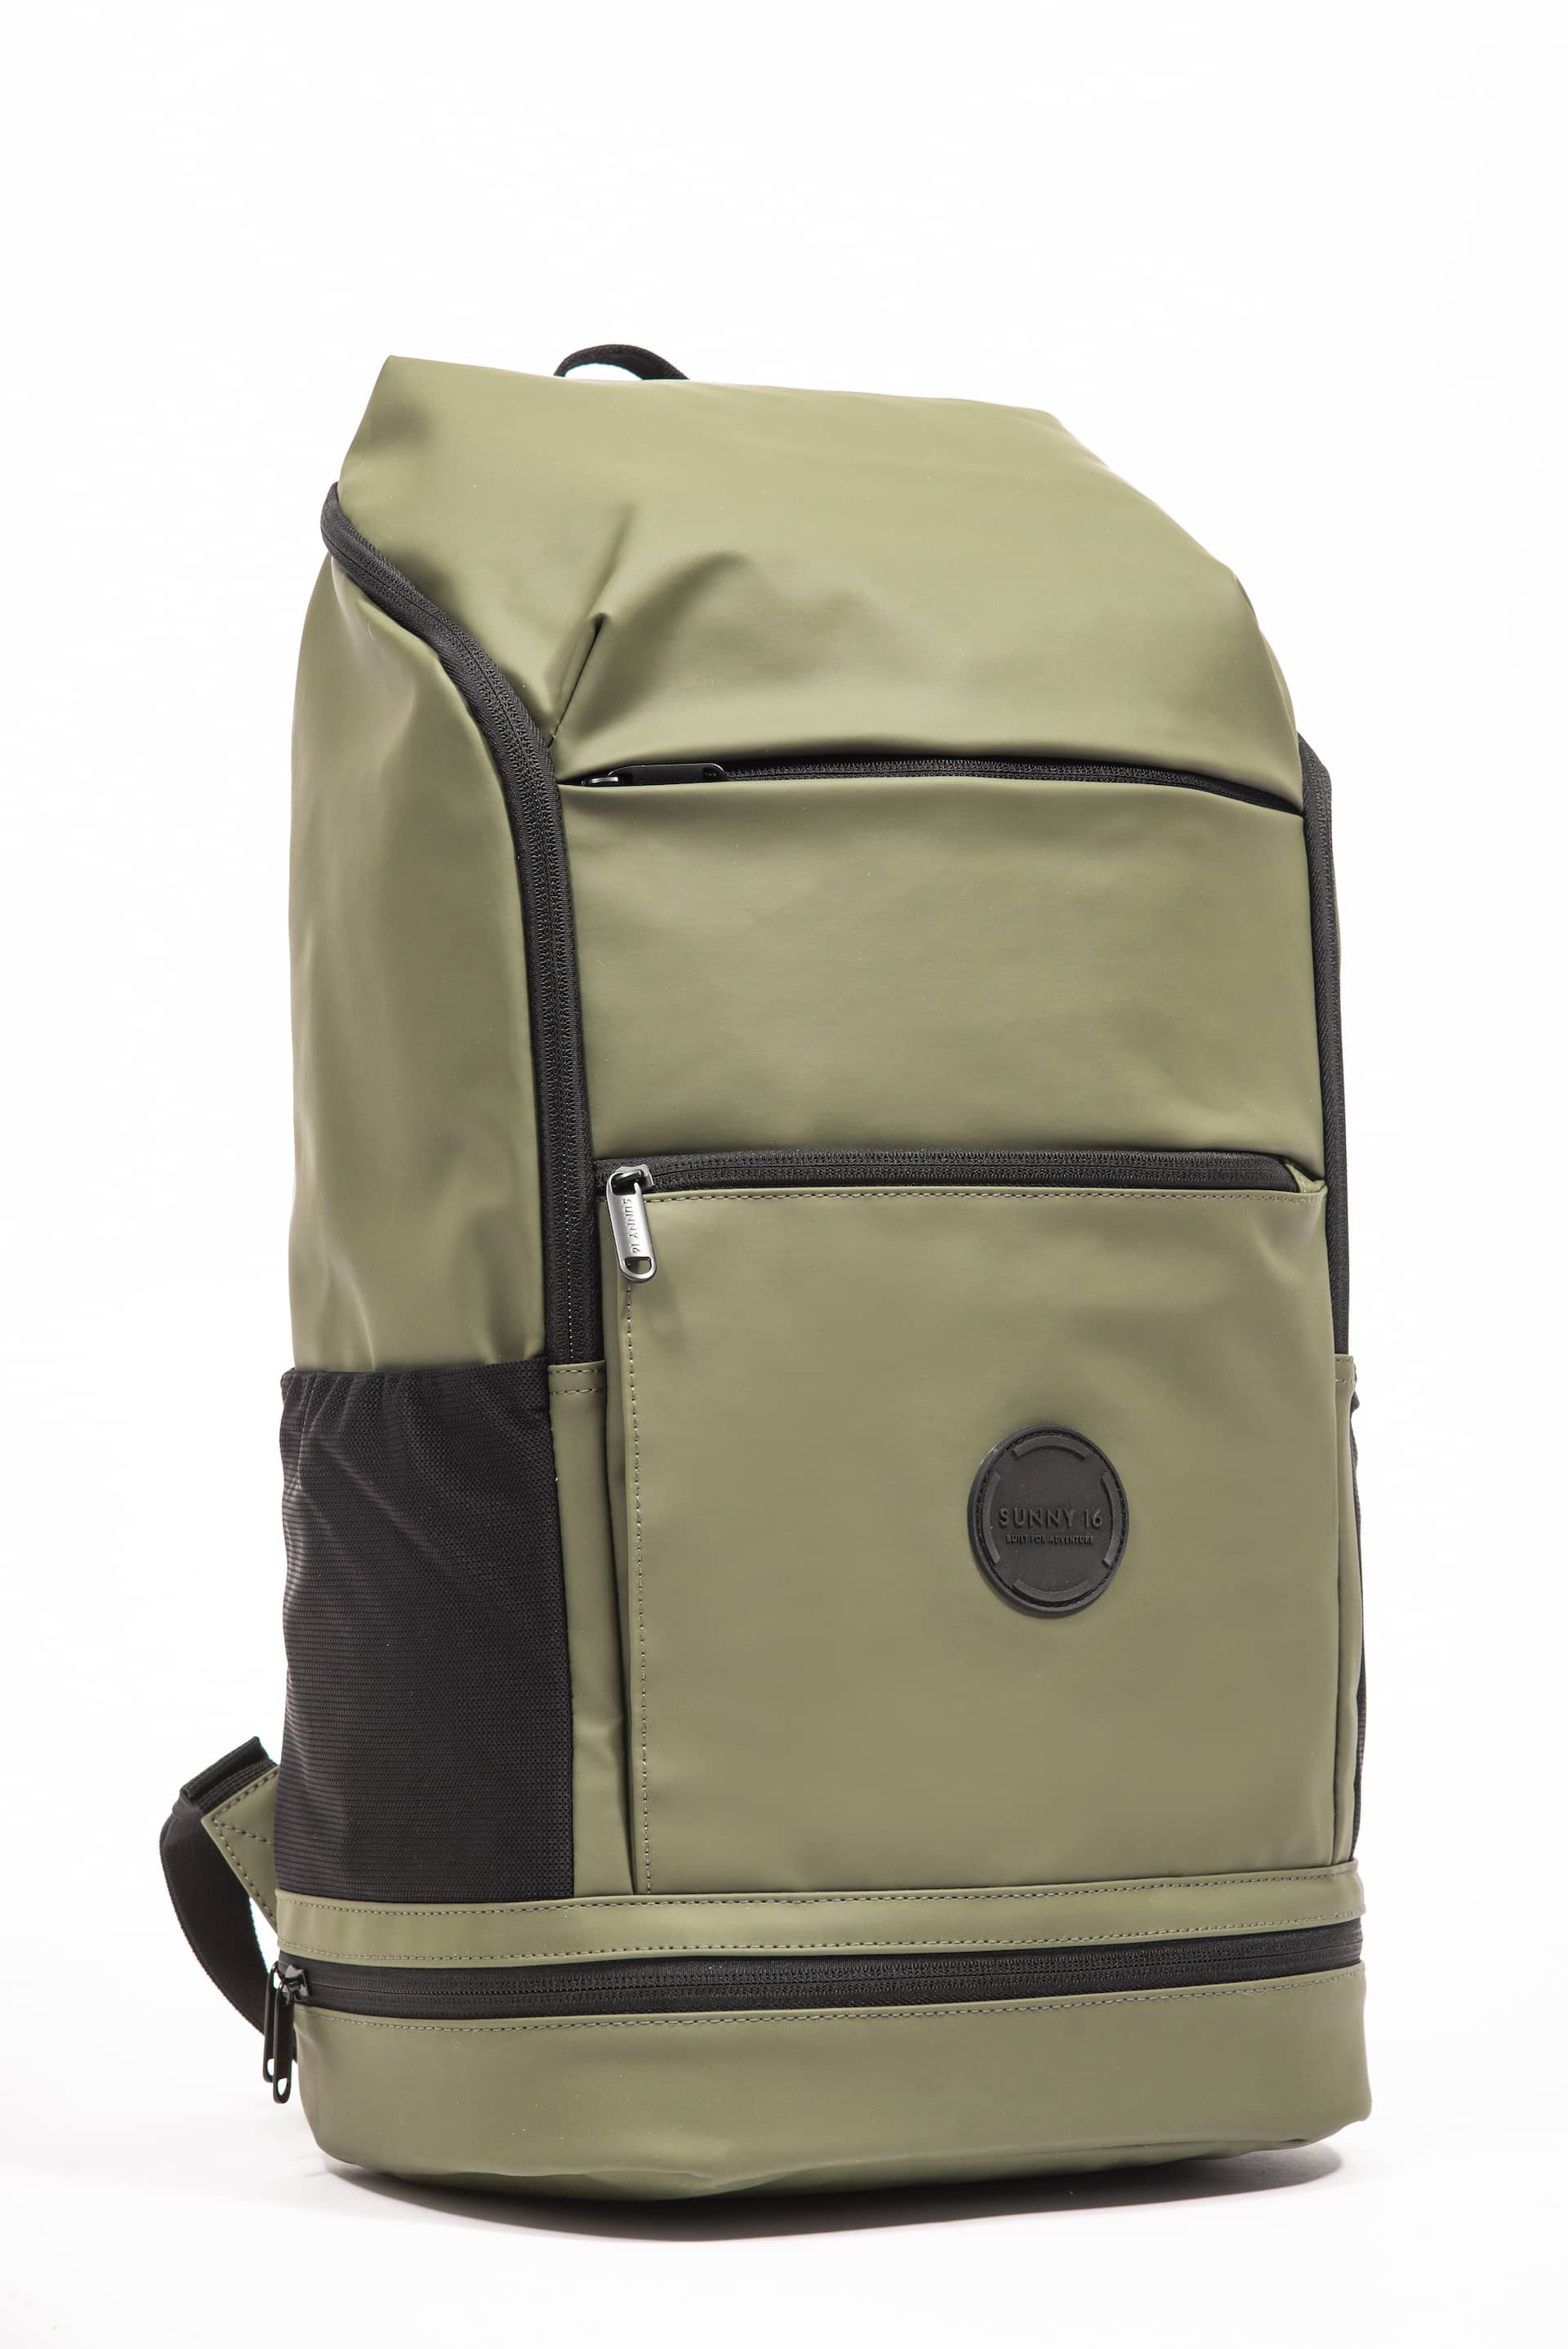 Travel Backpack with Shoe Compartment - Sunny 16